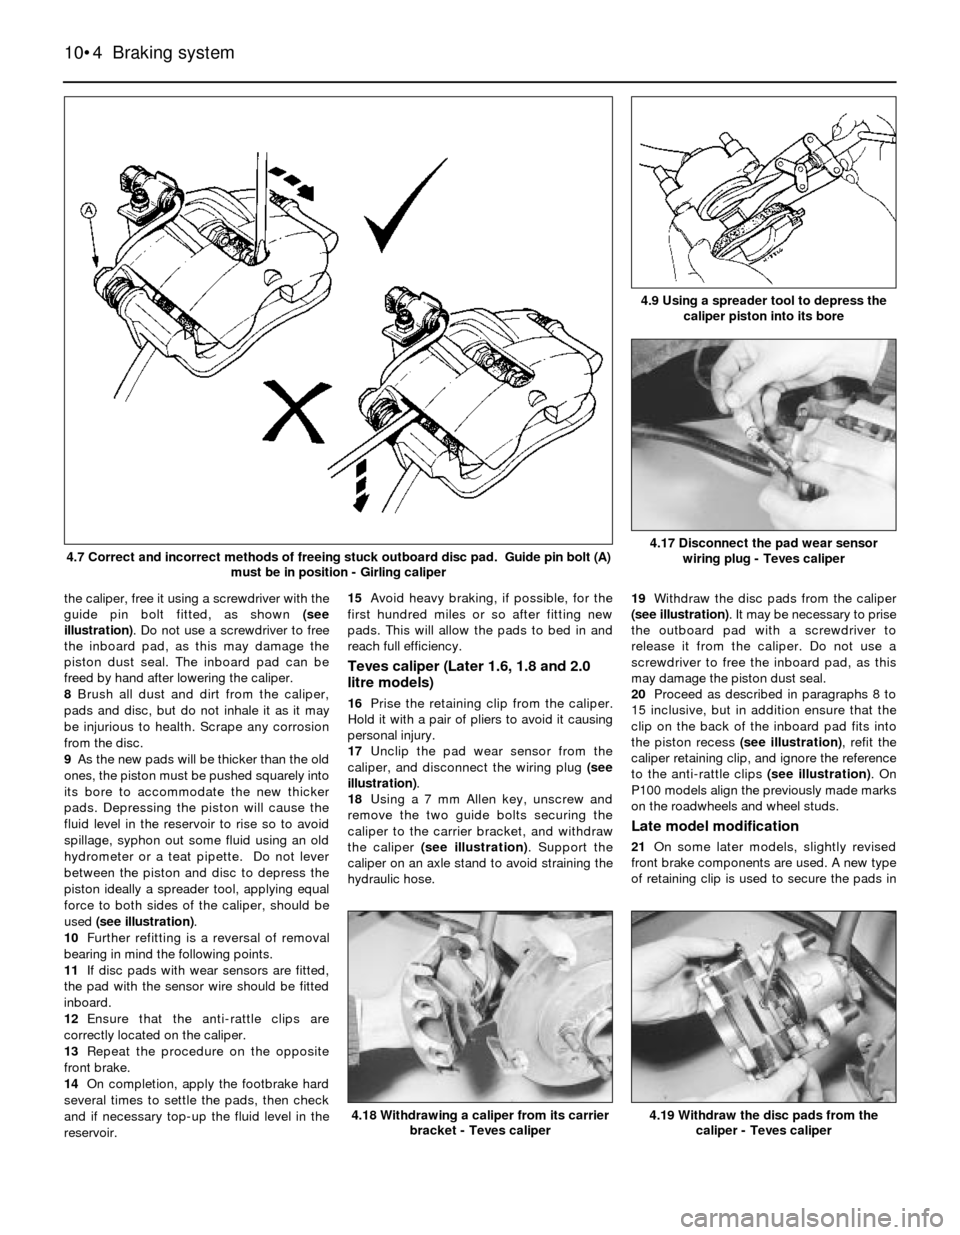 FORD SIERRA 1985 1.G Braking System Workshop Manual the caliper, free it using a screwdriver with the
guide pin bolt fitted, as shown (see
illustration). Do not use a screwdriver to free
the inboard pad, as this may damage the
piston dust seal. The inb